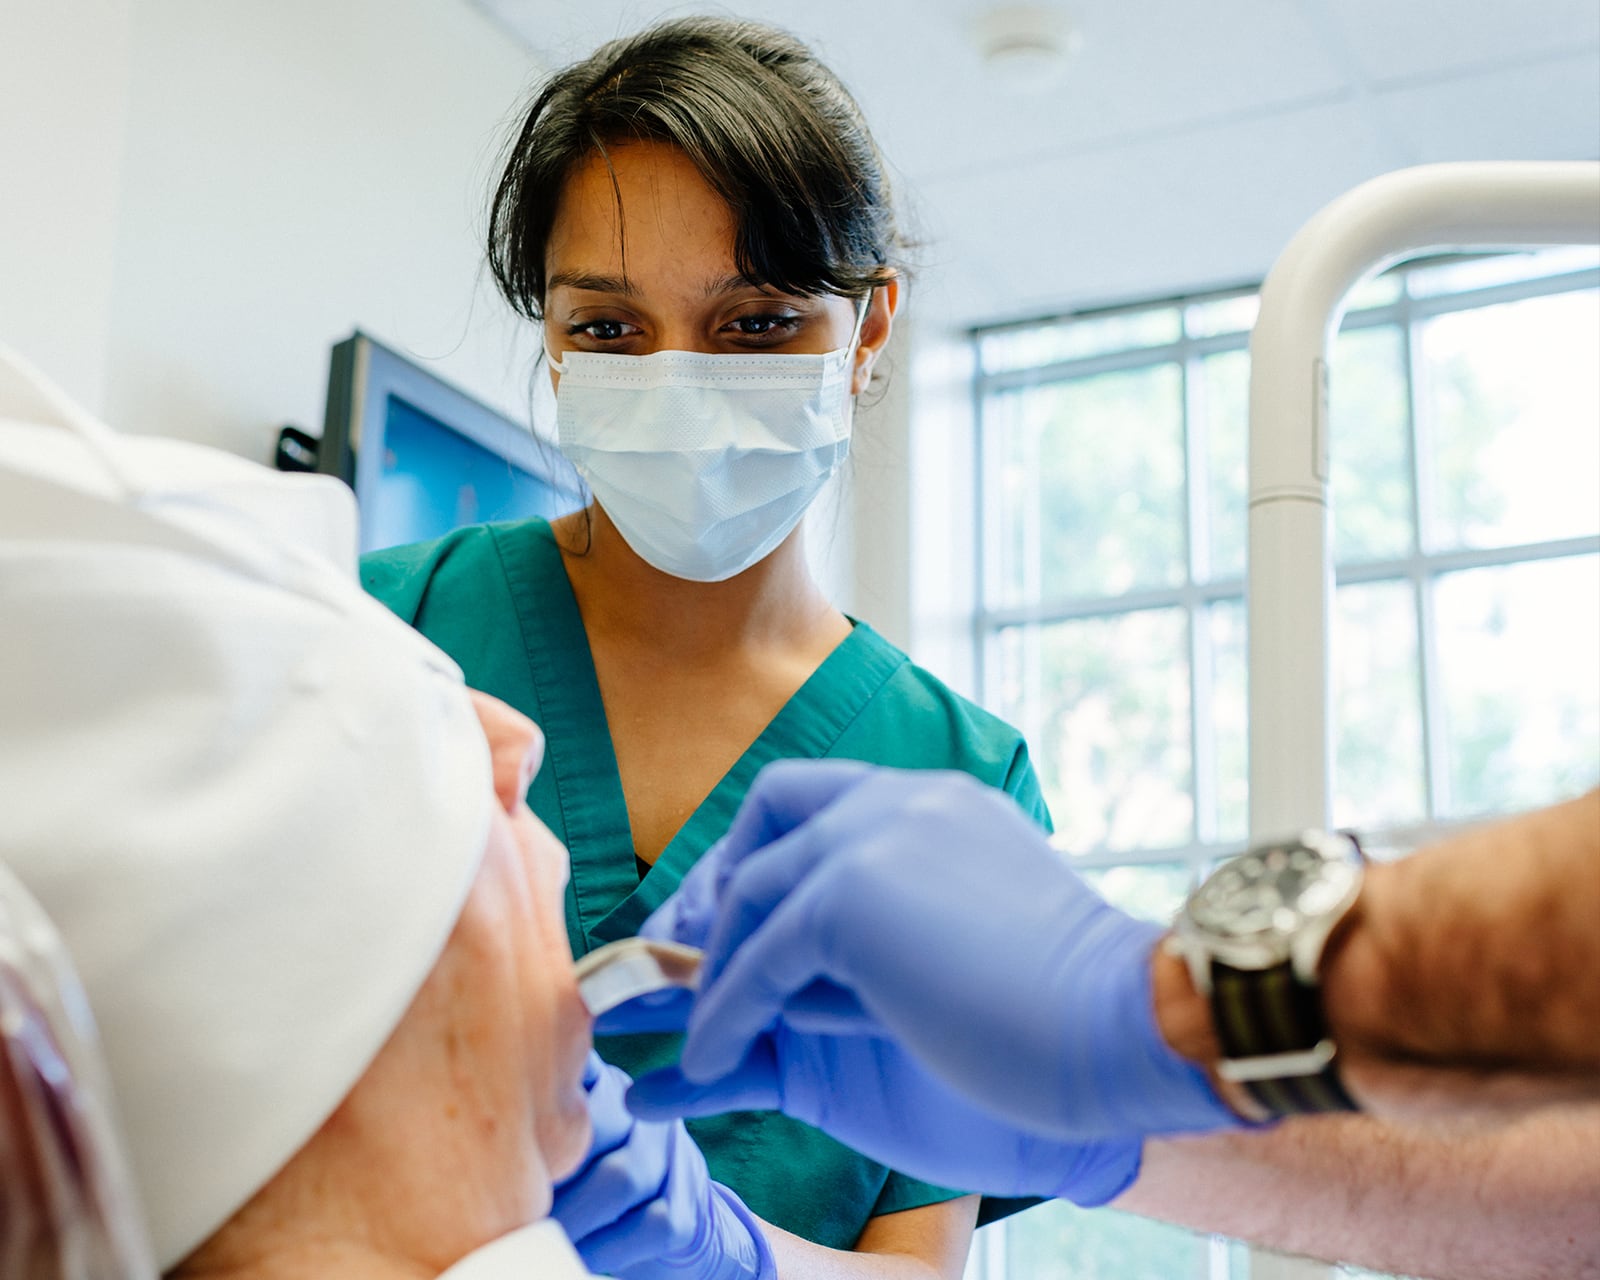 Dentist in a mask examining a patient's mouth.